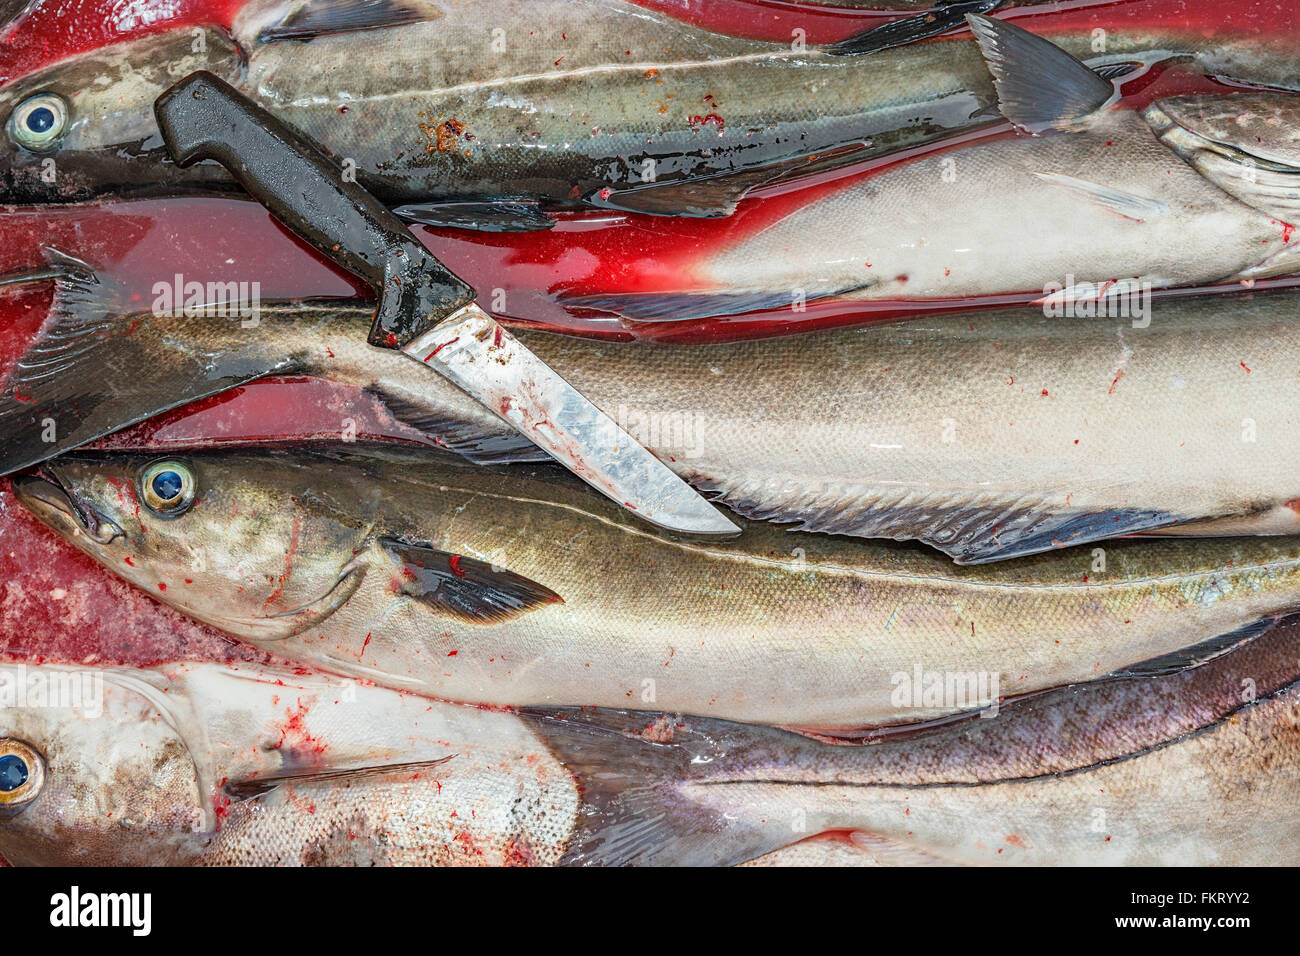 Catch of a 2-hour fishing trip includes several boxes of coalfish and cod. Lofoten islands, Norway. Stock Photo